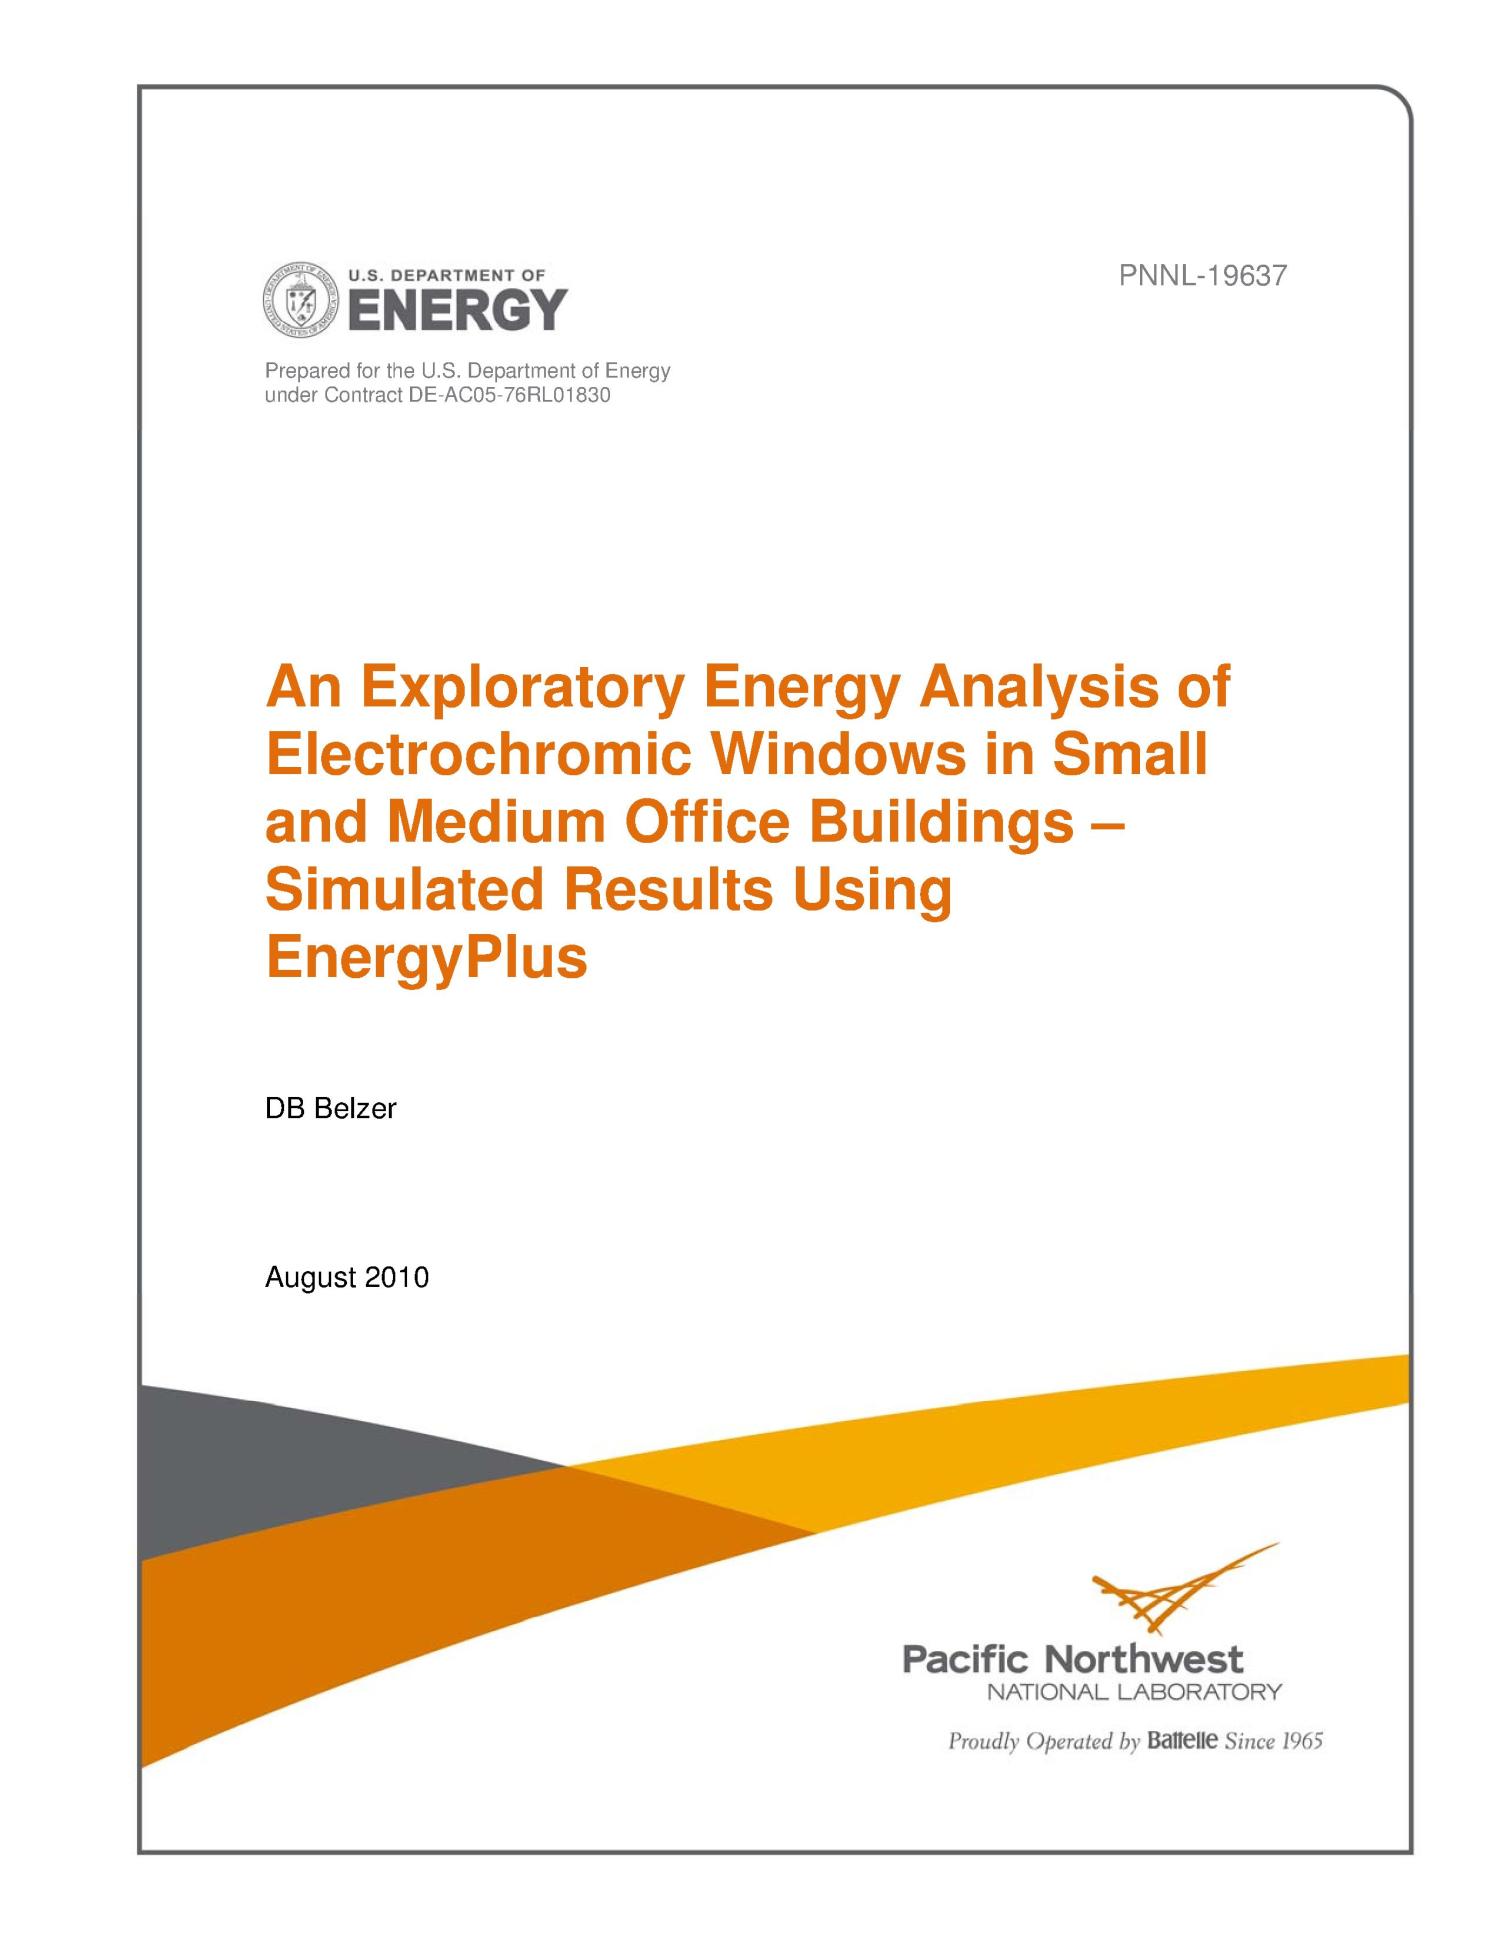 An Exploratory Energy Analysis of Electrochromic Windows in Small and Medium Office Buildings - Simulated Results Using EnergyPlus
                                                
                                                    [Sequence #]: 1 of 50
                                                